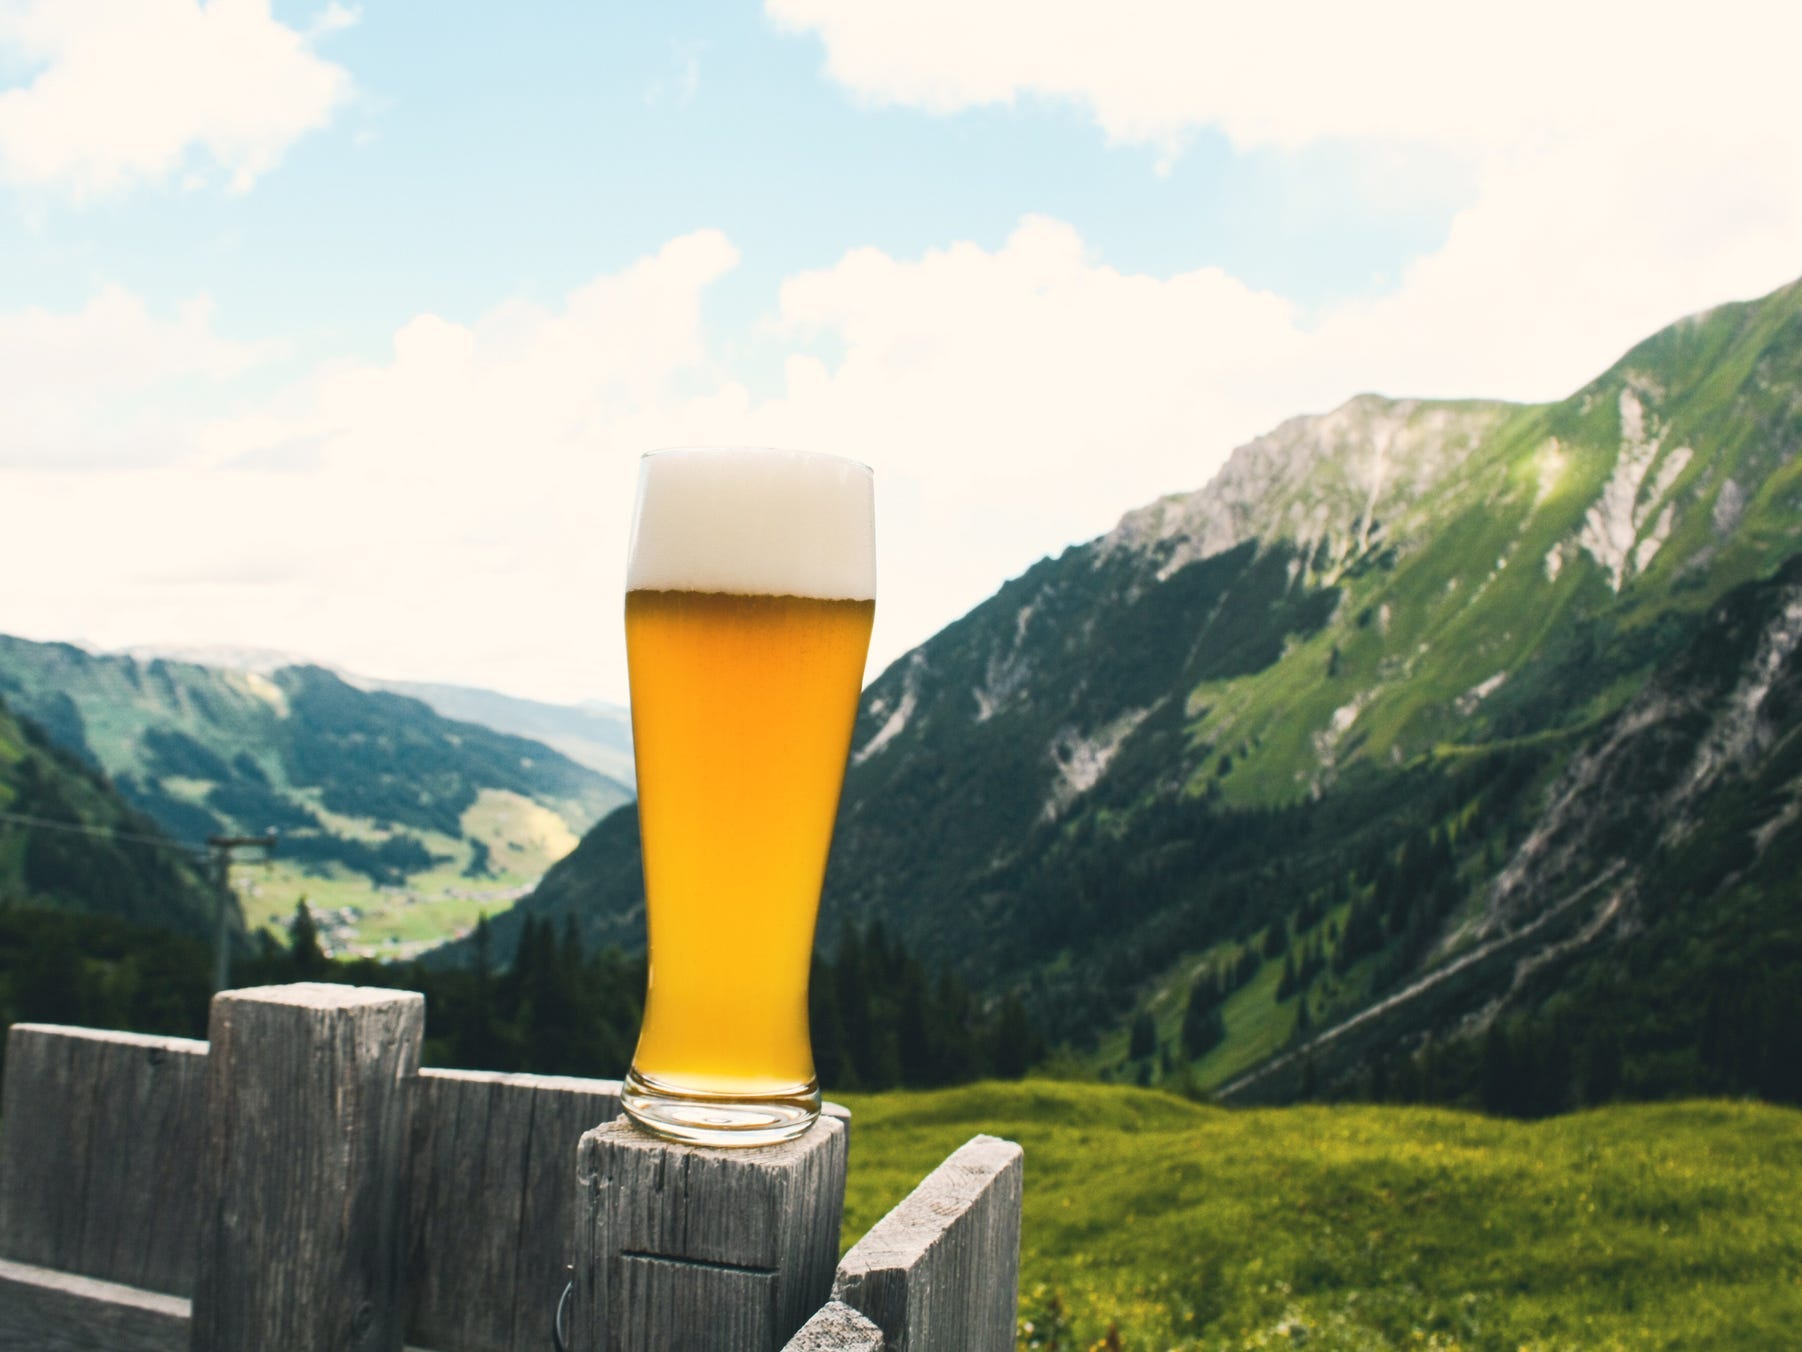 A pint of beer sitting on a wooden fence post with a beautiful rolling mountainside in the background